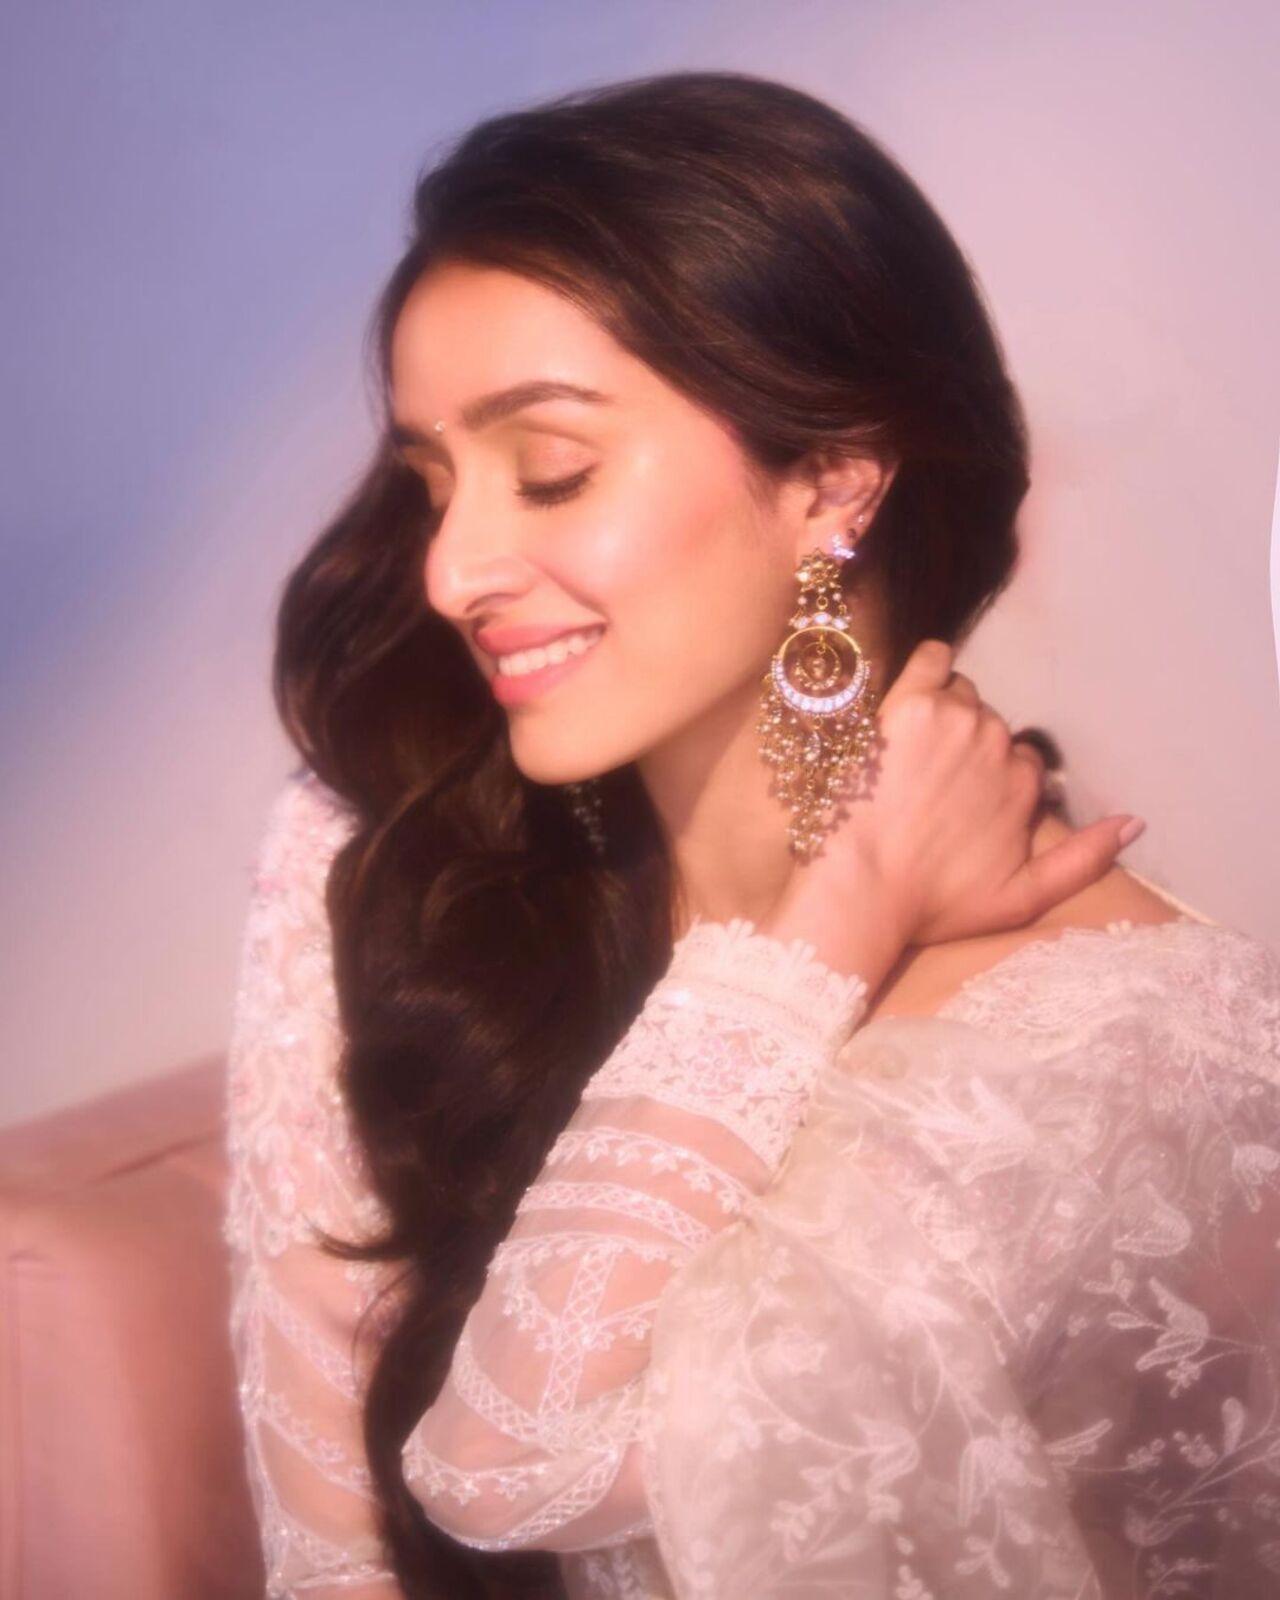 Shraddha Kapoor teased fans if she should get married by sharing these dreamy-looking pictures of herself. 